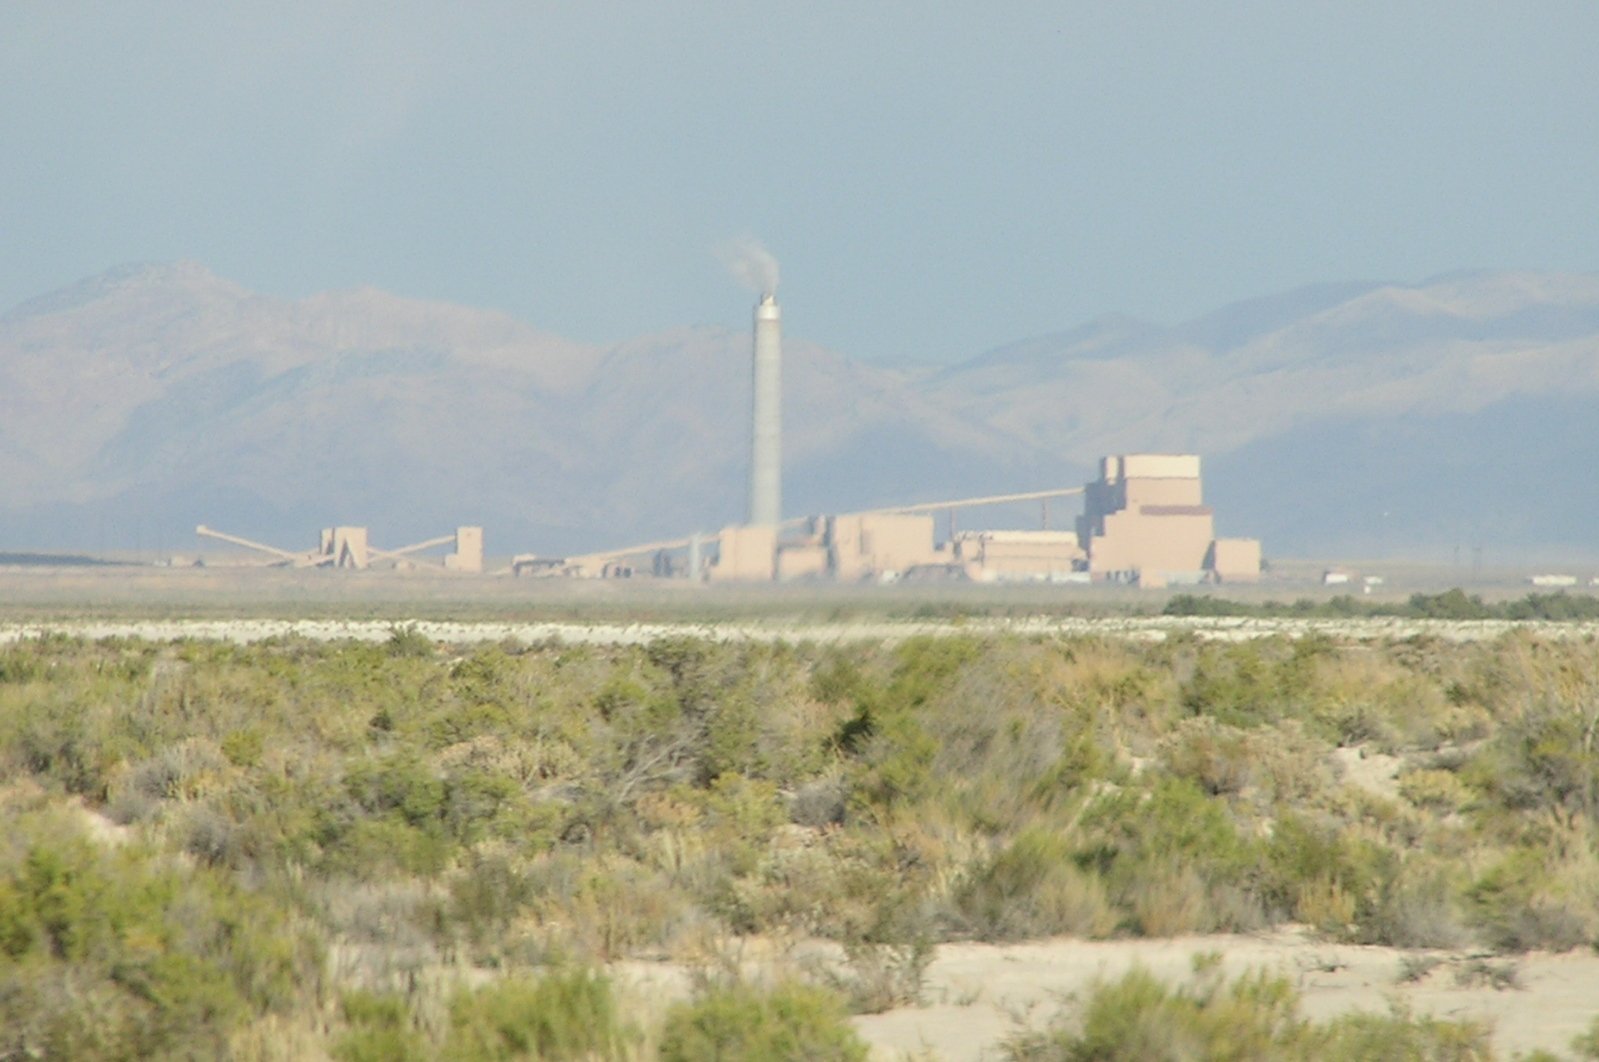 a view of an industrial plant with hills in the background